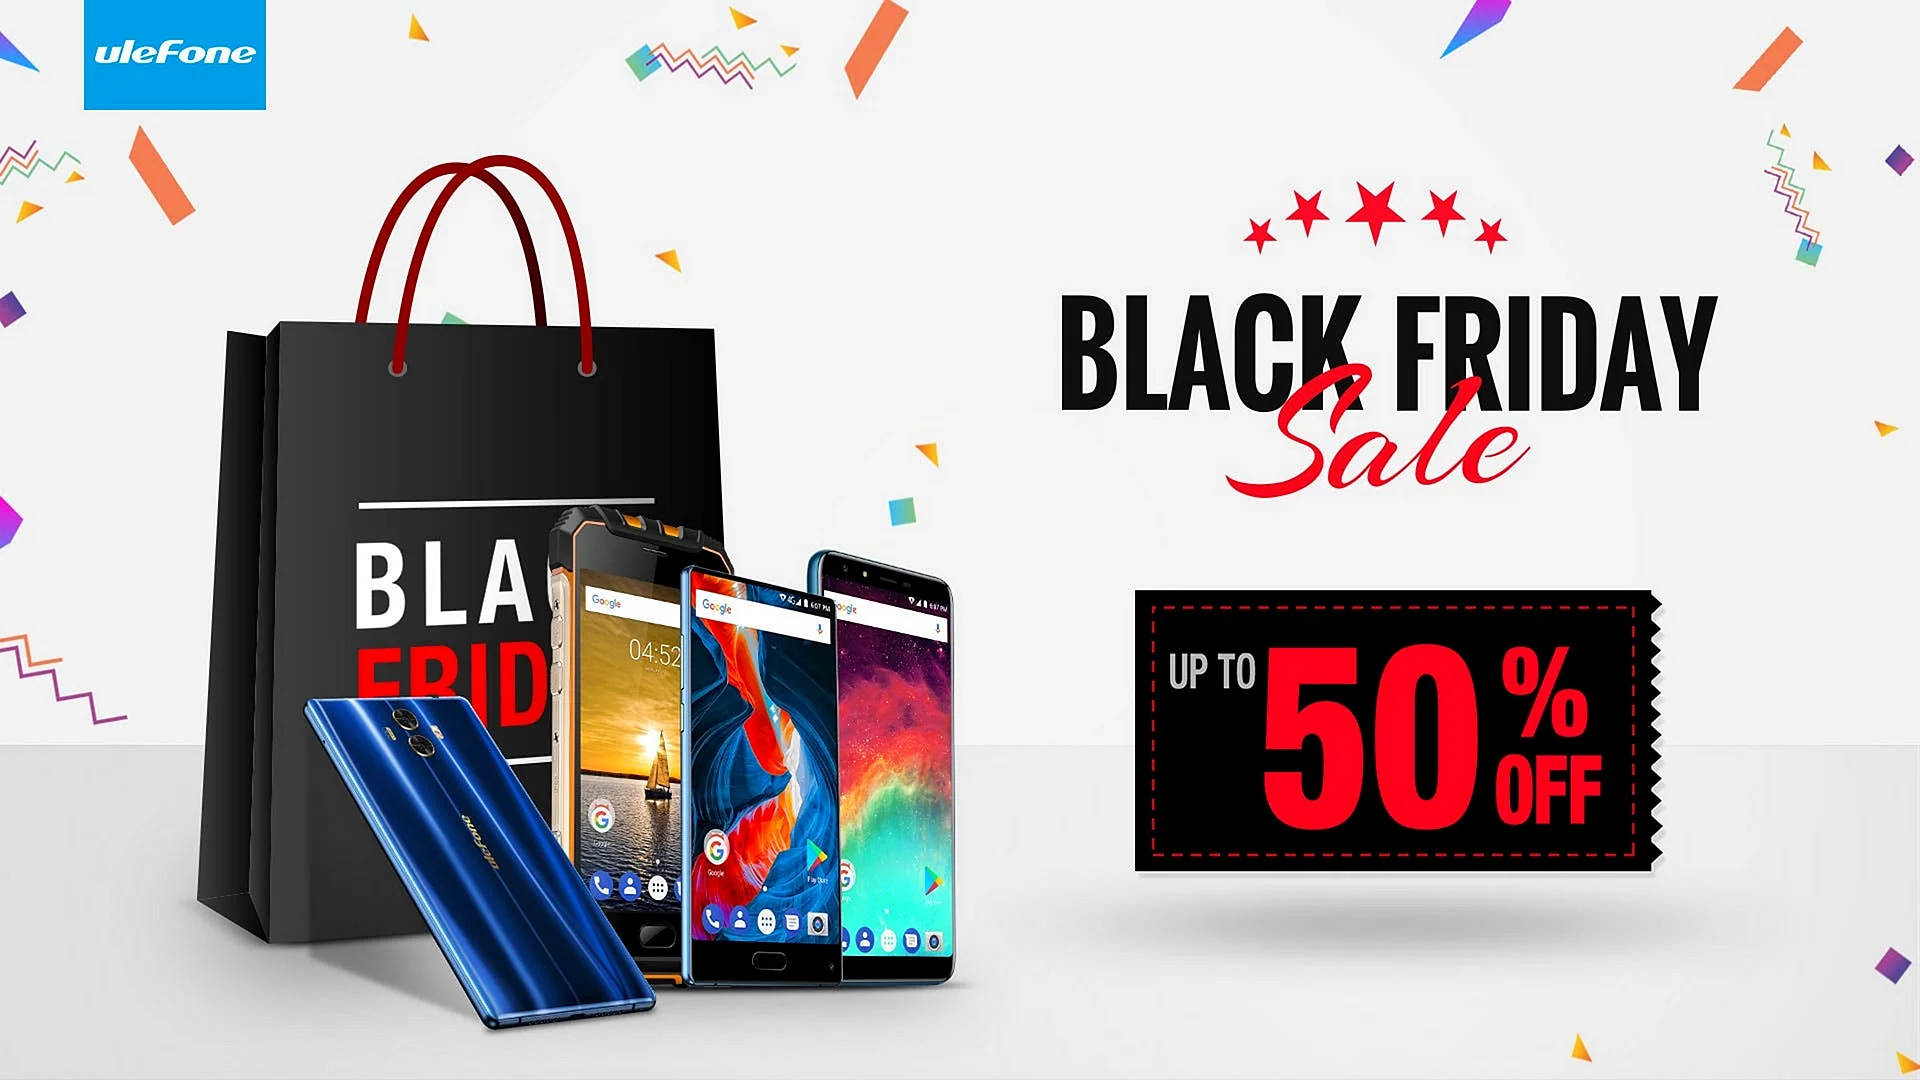 Black Friday discounts on mobiles Wallpaper